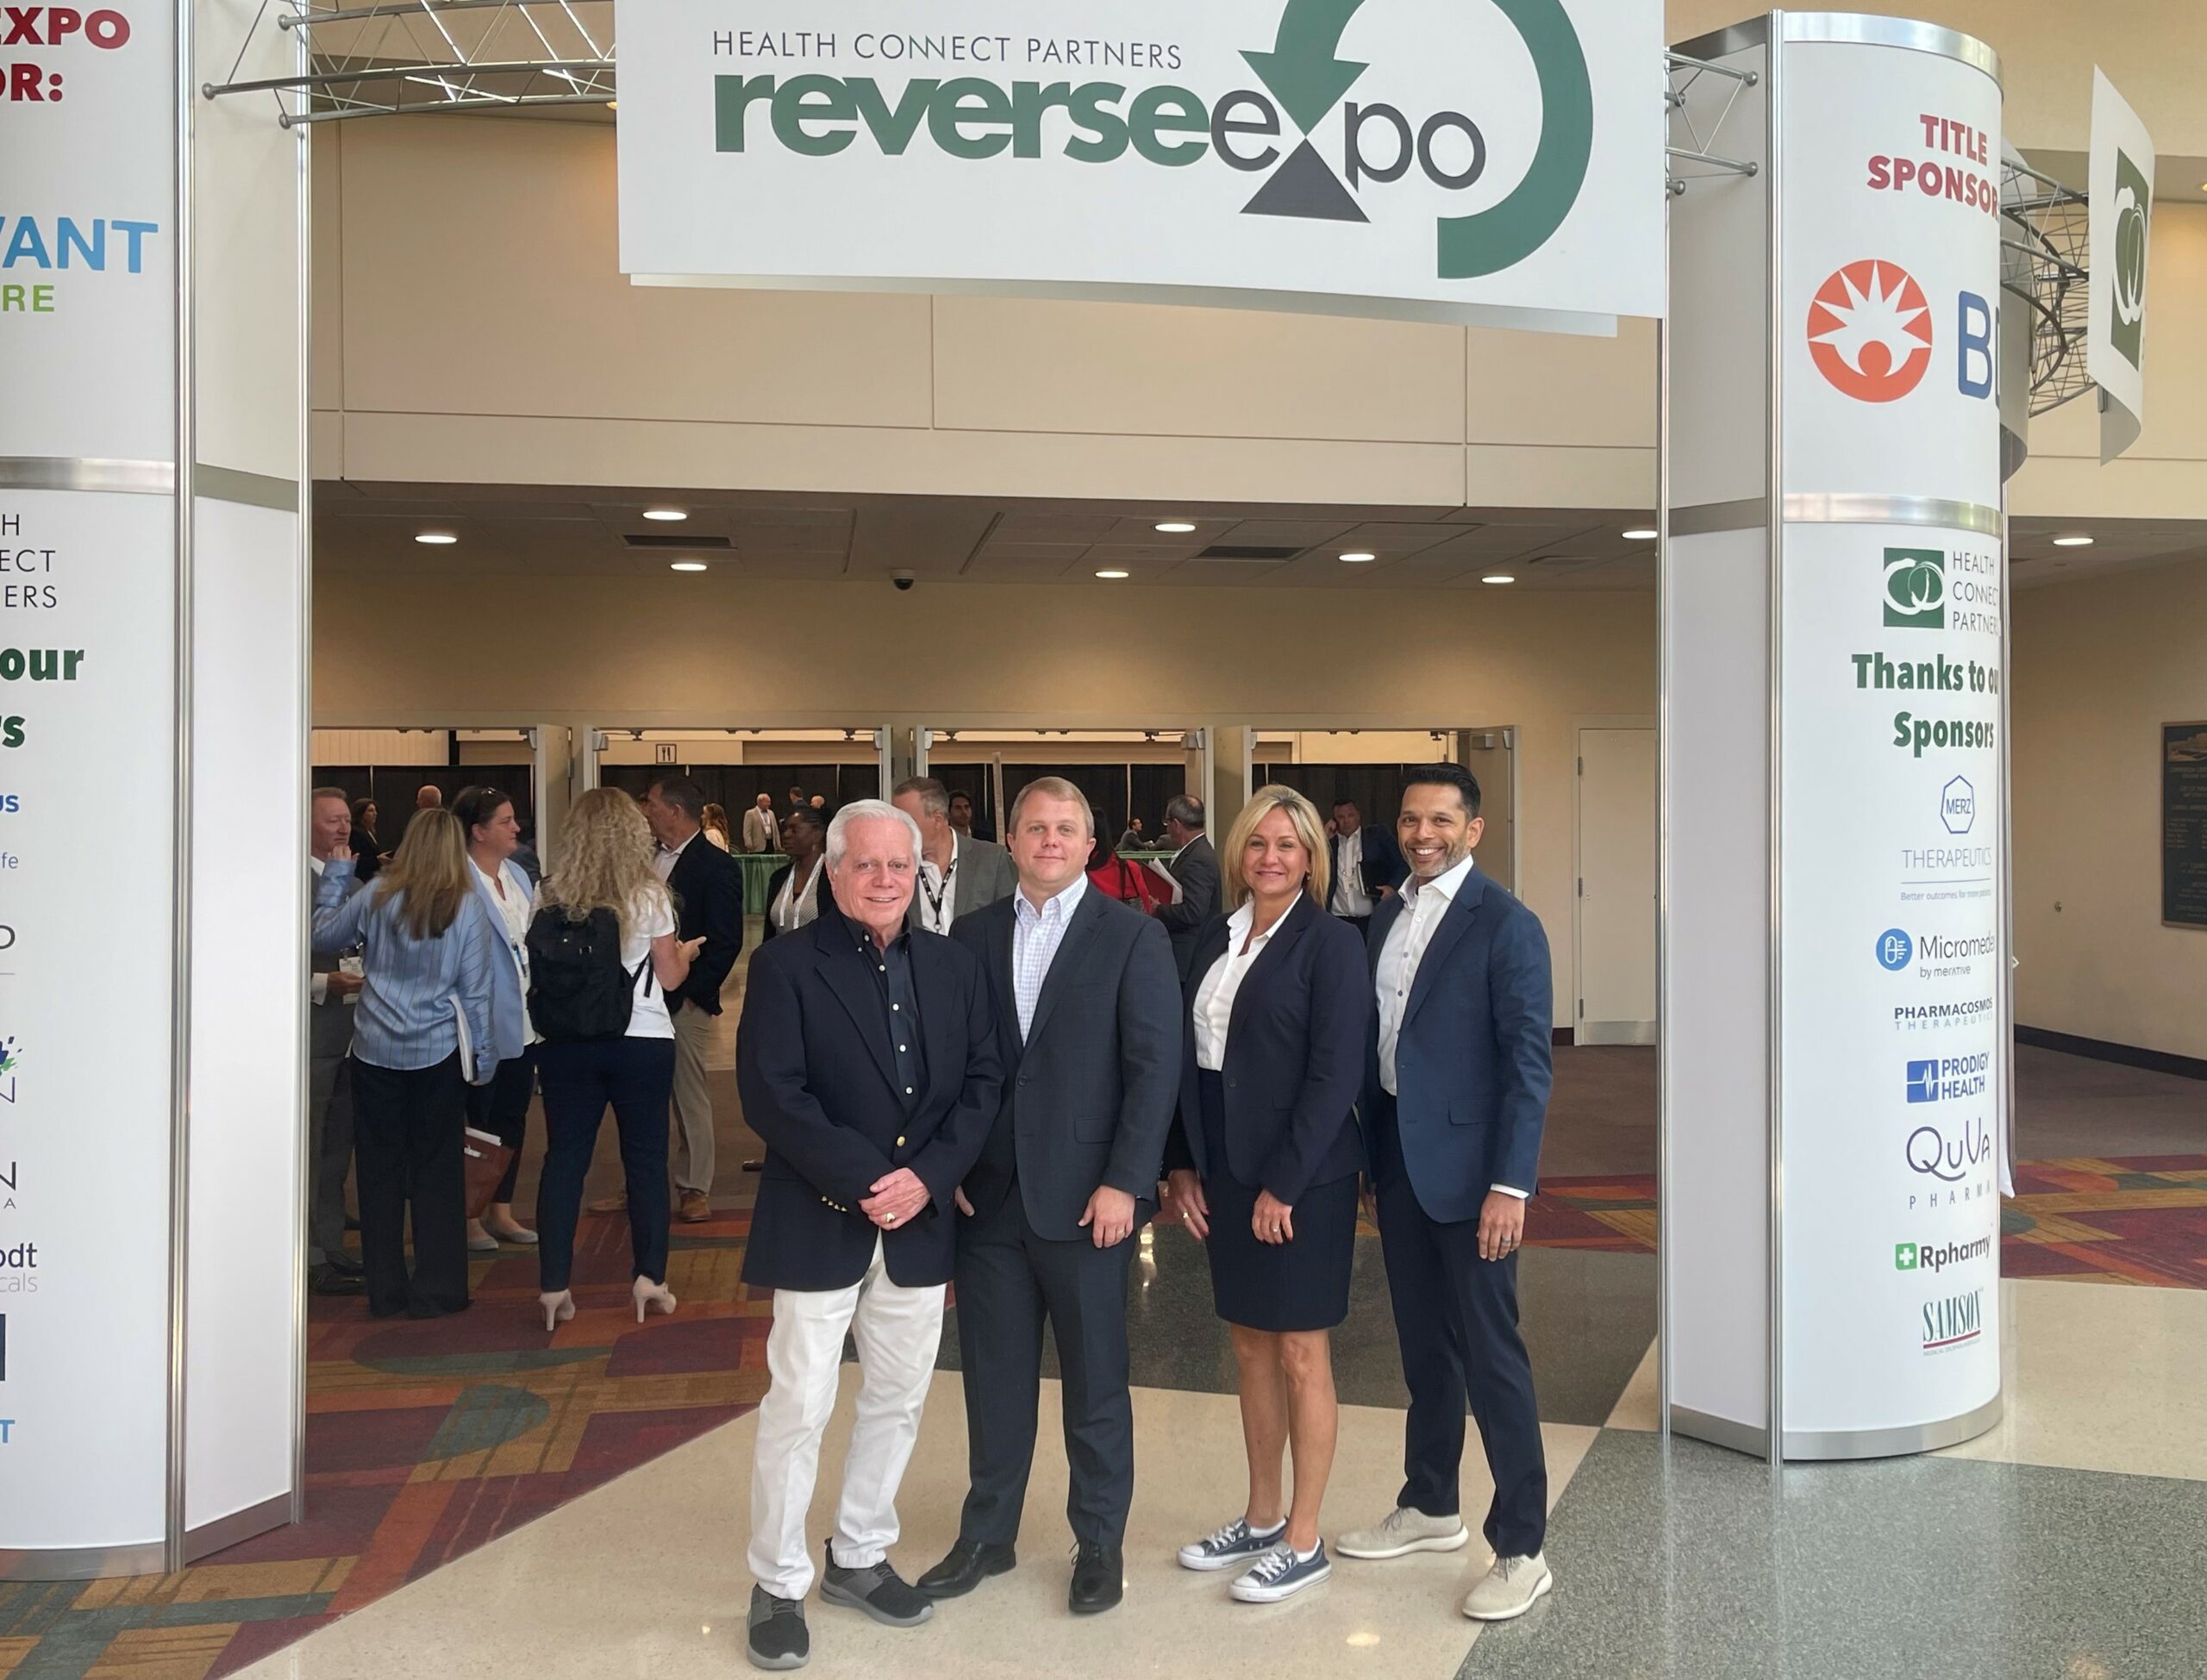 Eagle President & CEO Ross Caputo, PCCA Director of Clinical Services Matt Martin, Eagle VP of Marketing & Business Development Lisa Johnson, and PCCA VP of Clinical Services A.J. Day smile while attending the 2023 Health Connect Partners Reverse Expo in Indianapolis.